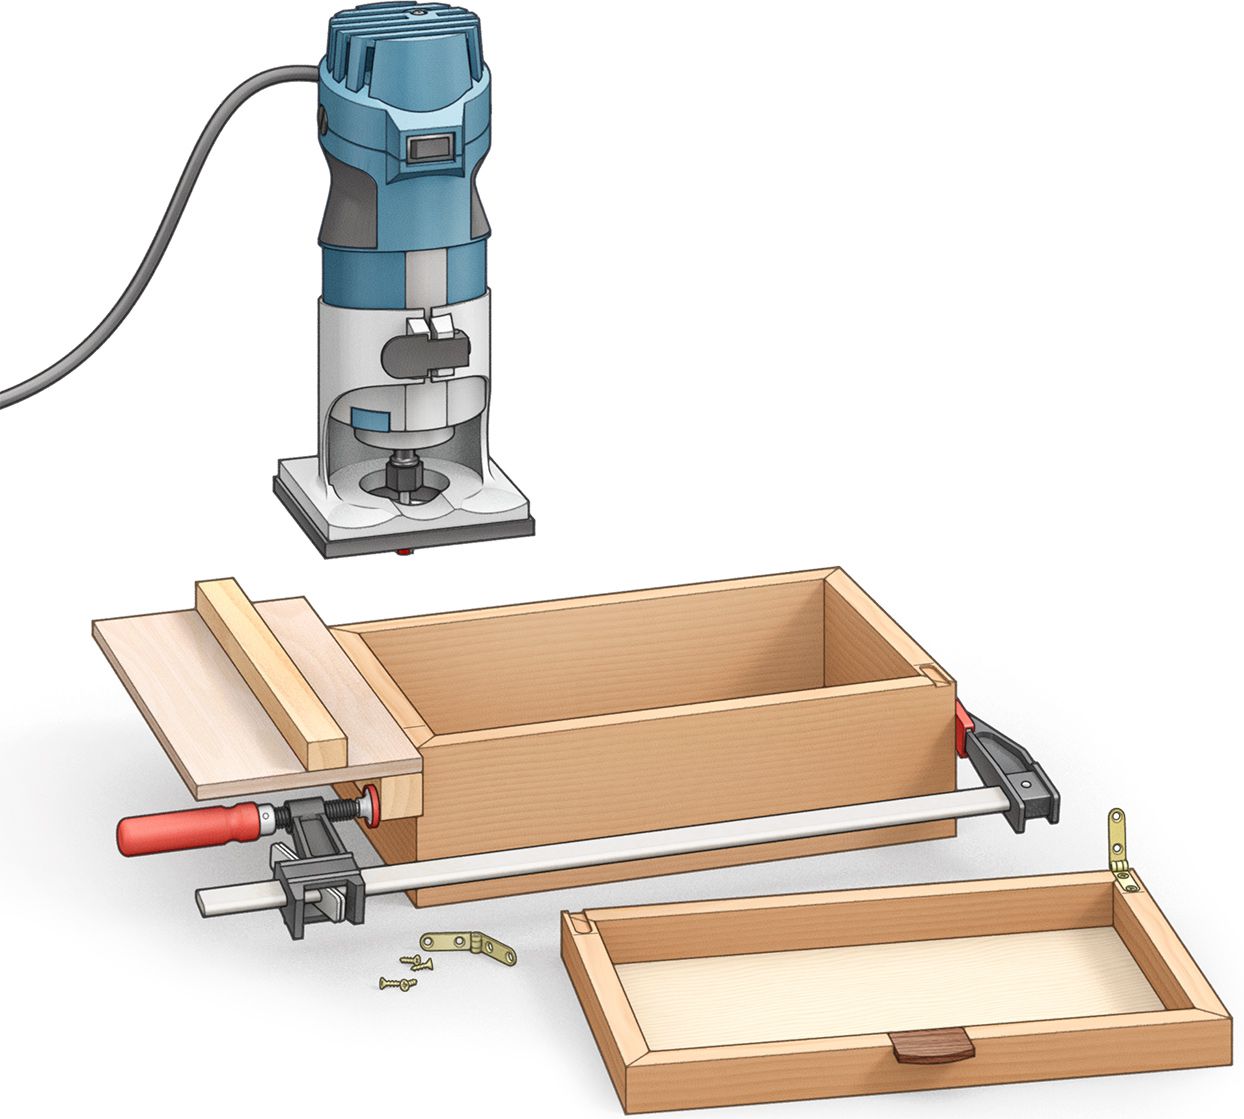 illustration of the router jig